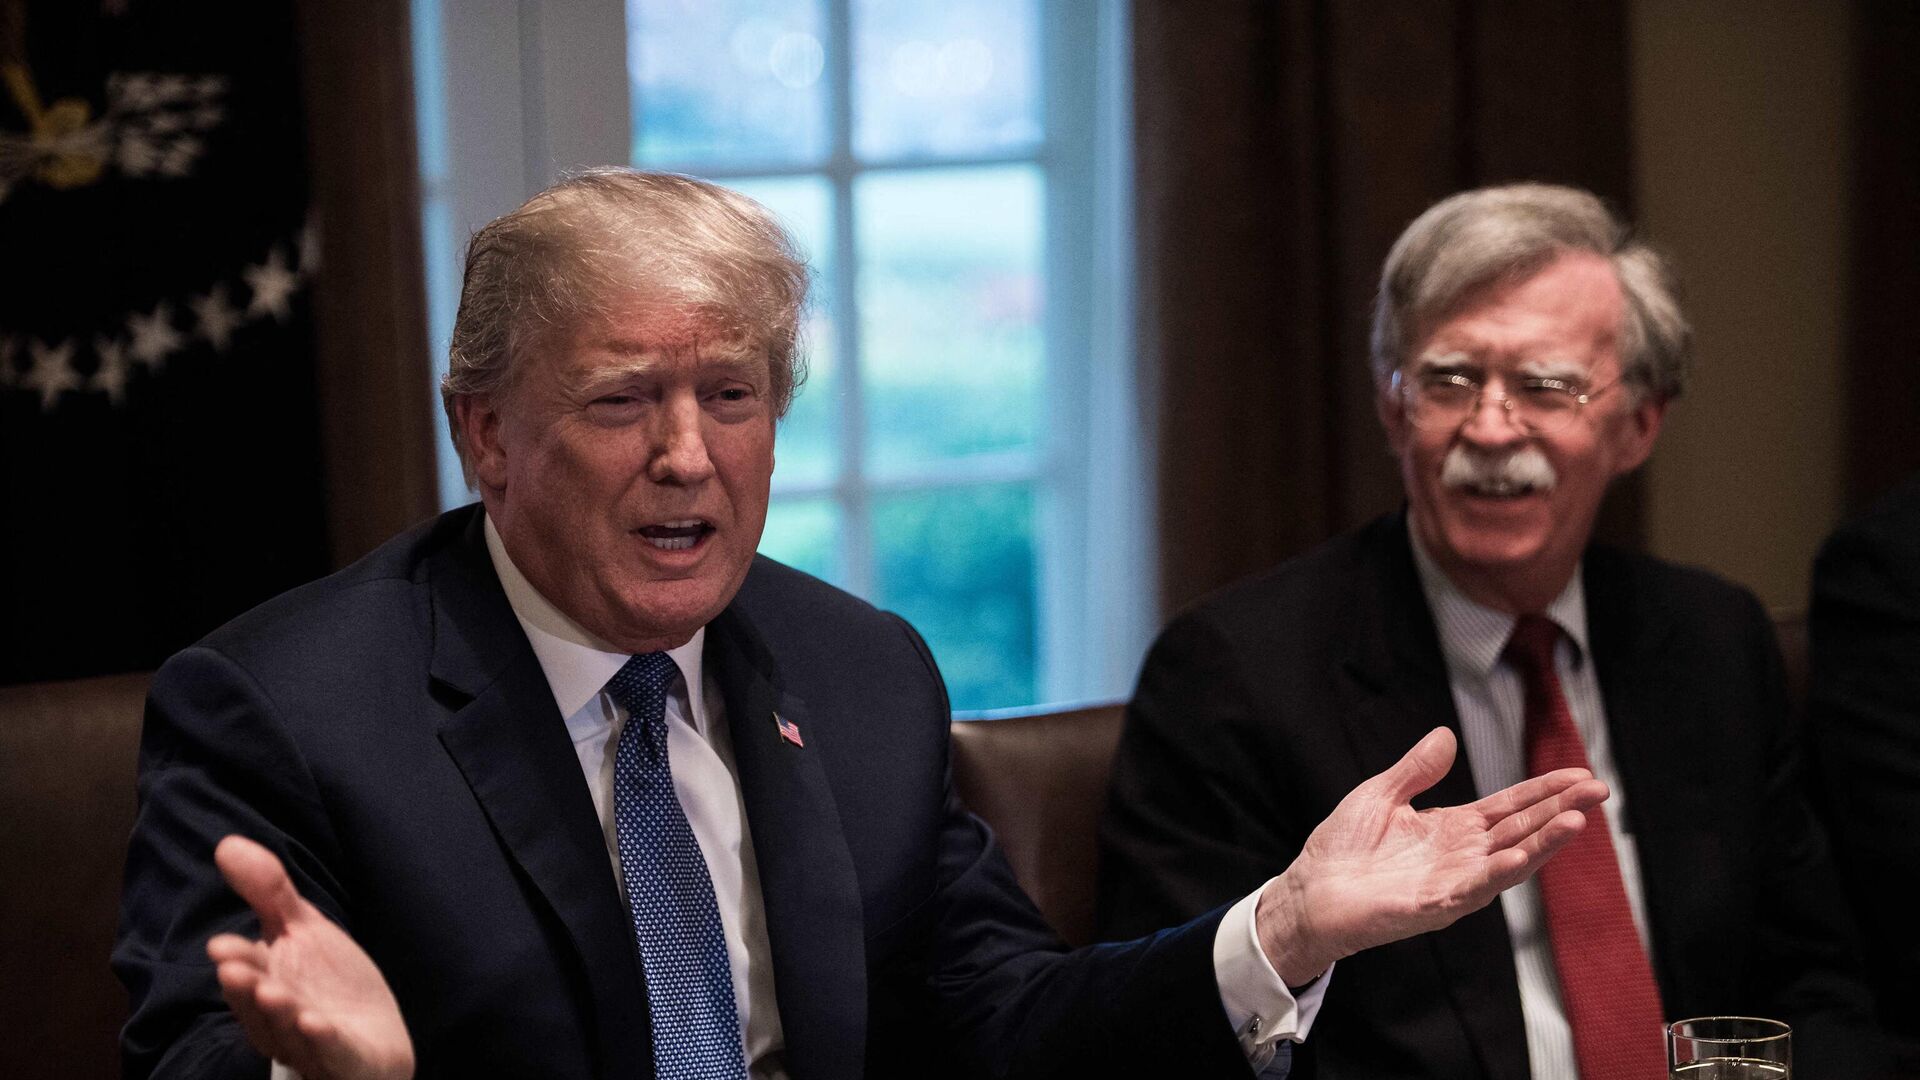 US President Donald Trump speaks during a meeting with senior military leaders at the White House in Washington, DC, on April 9, 2018. At right is new National Security Advisor John Bolton. (Photo by NICHOLAS KAMM / AFP) - Sputnik International, 1920, 27.06.2023